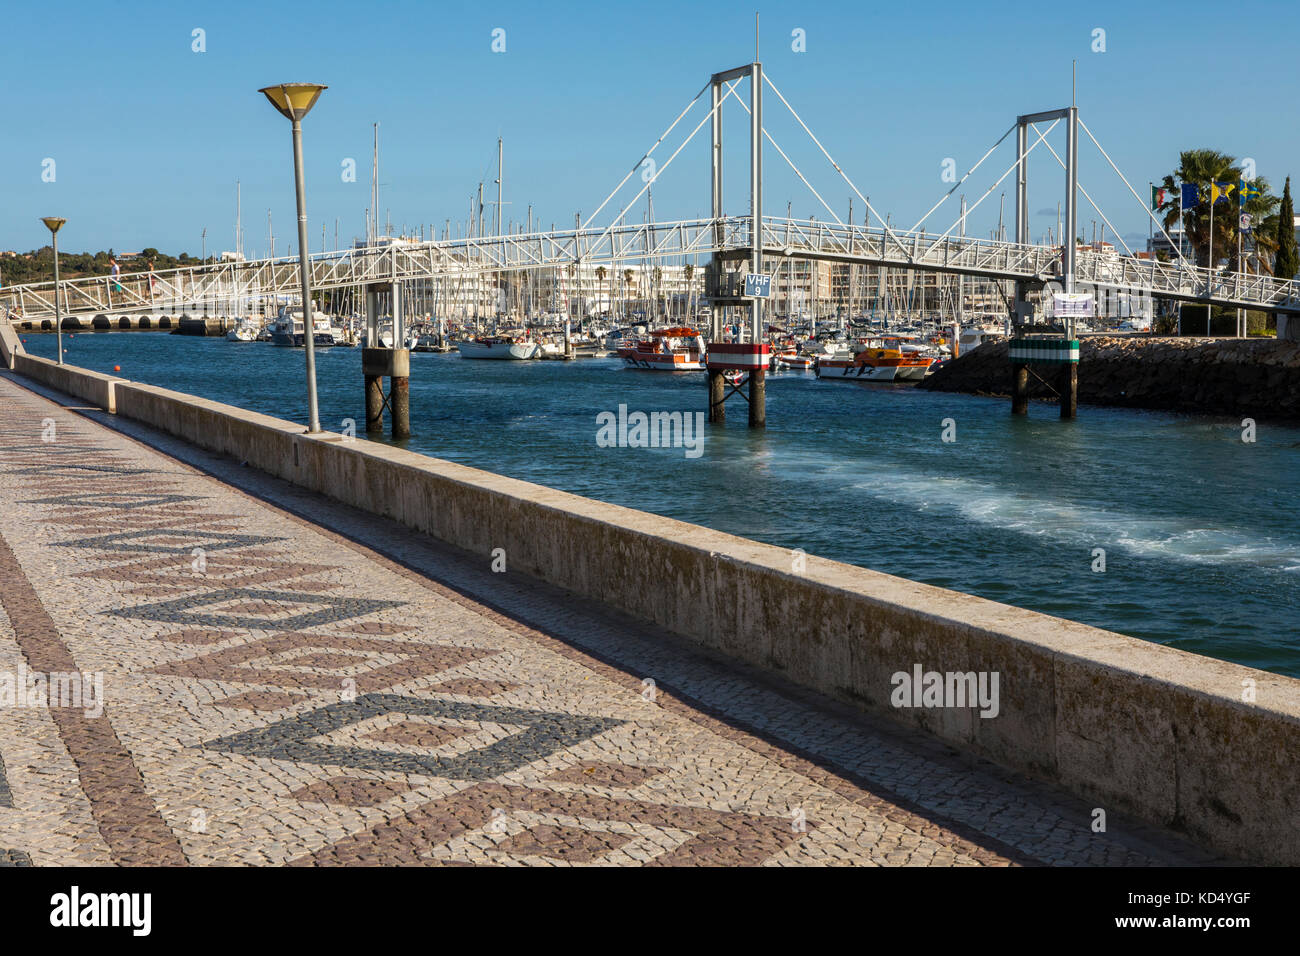 LAGOS, PORTUGAL - SEPTEMBER 10TH 2017: A view of the pedestrian drawbridge at the Marina de Lagos in the Algarve, Portugal, on 10th September 2017. Stock Photo